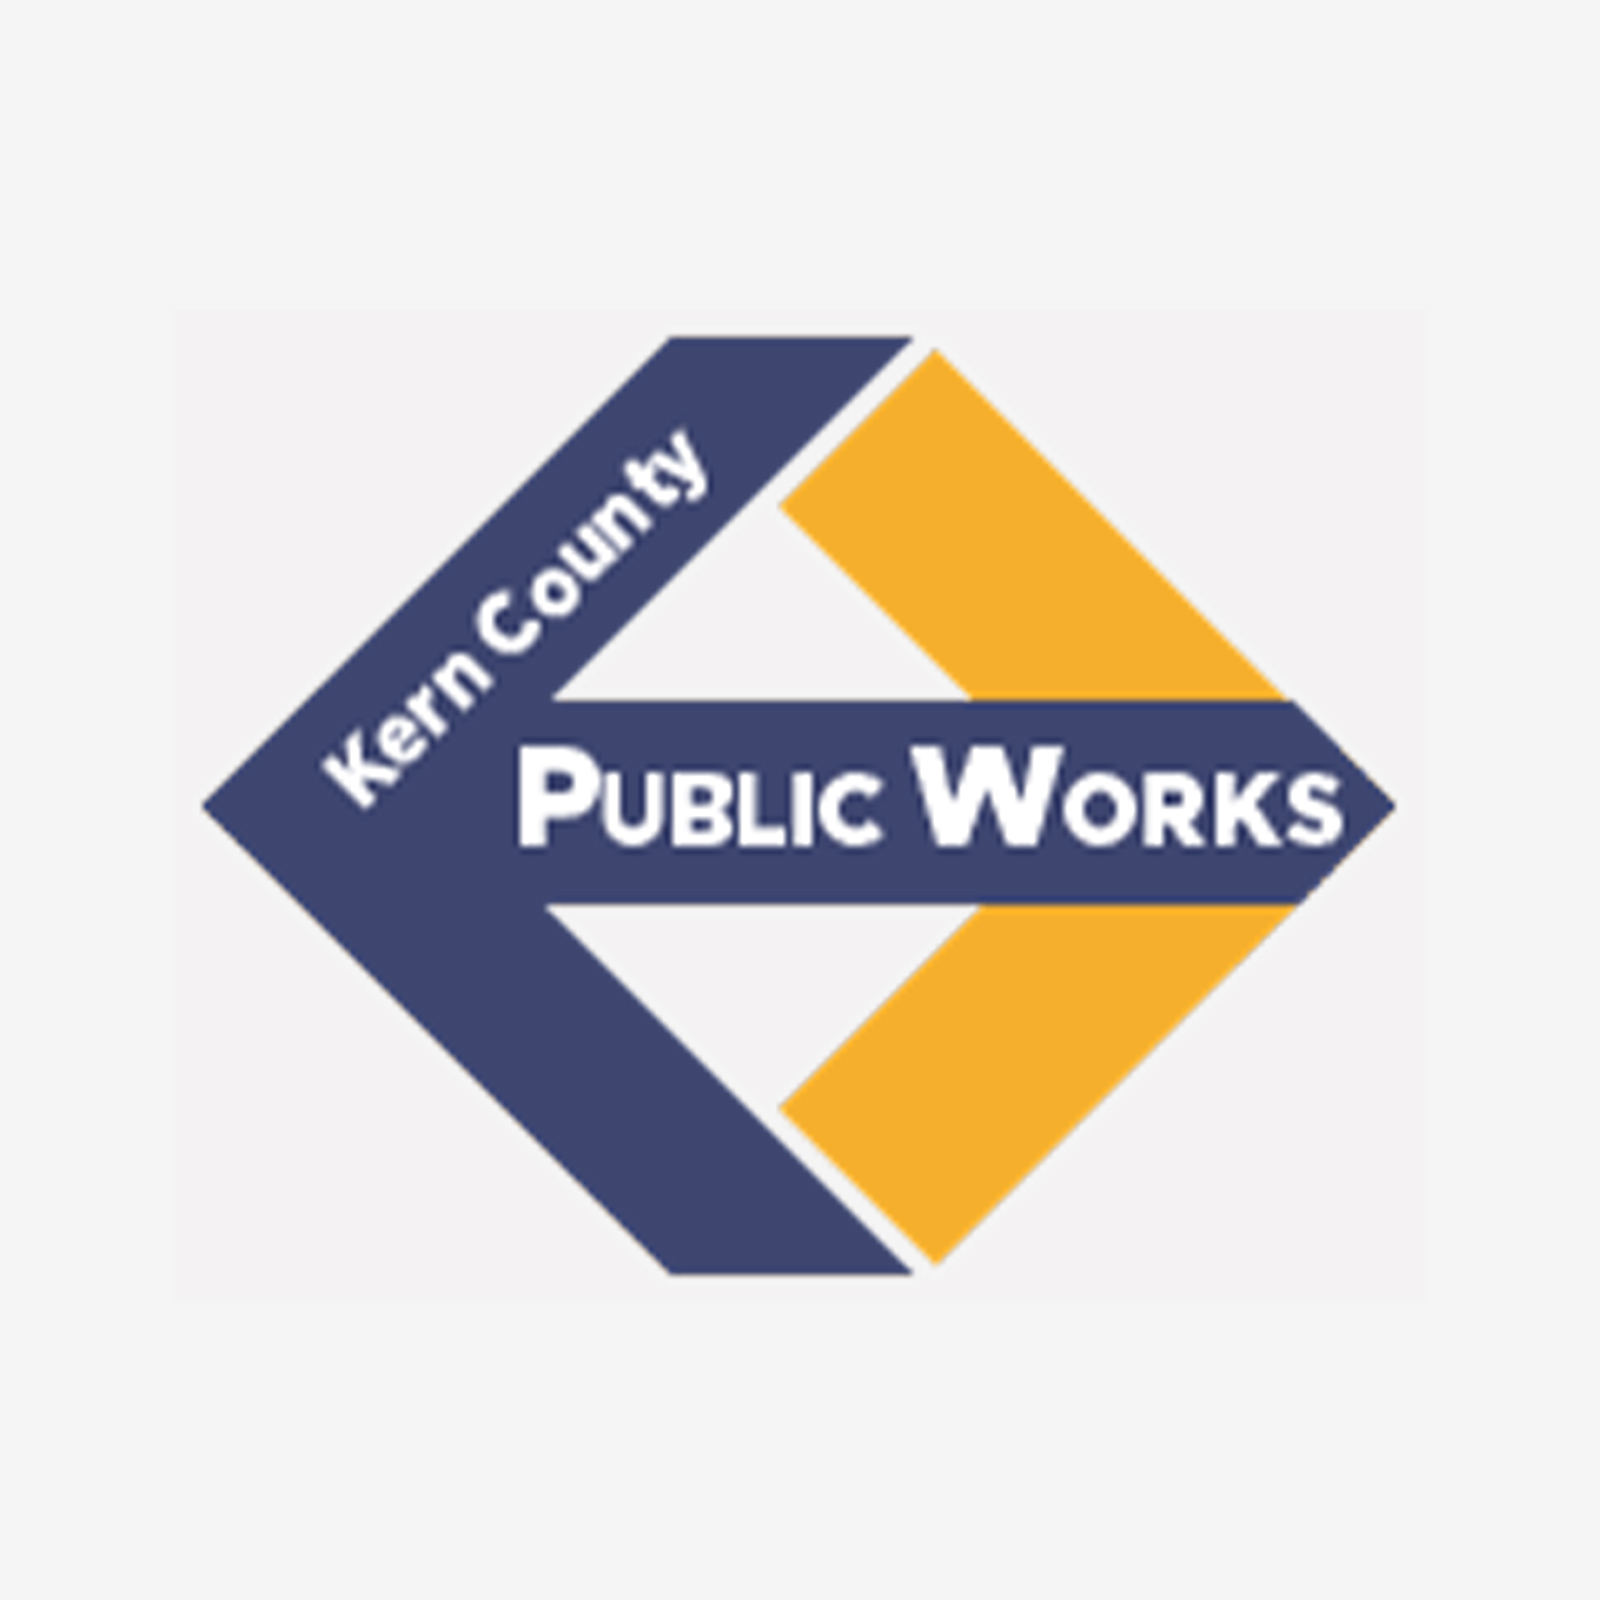 The old logo of Kern County Public Works, depicted by a diamond shape with colors that didn't match the public agency's brand